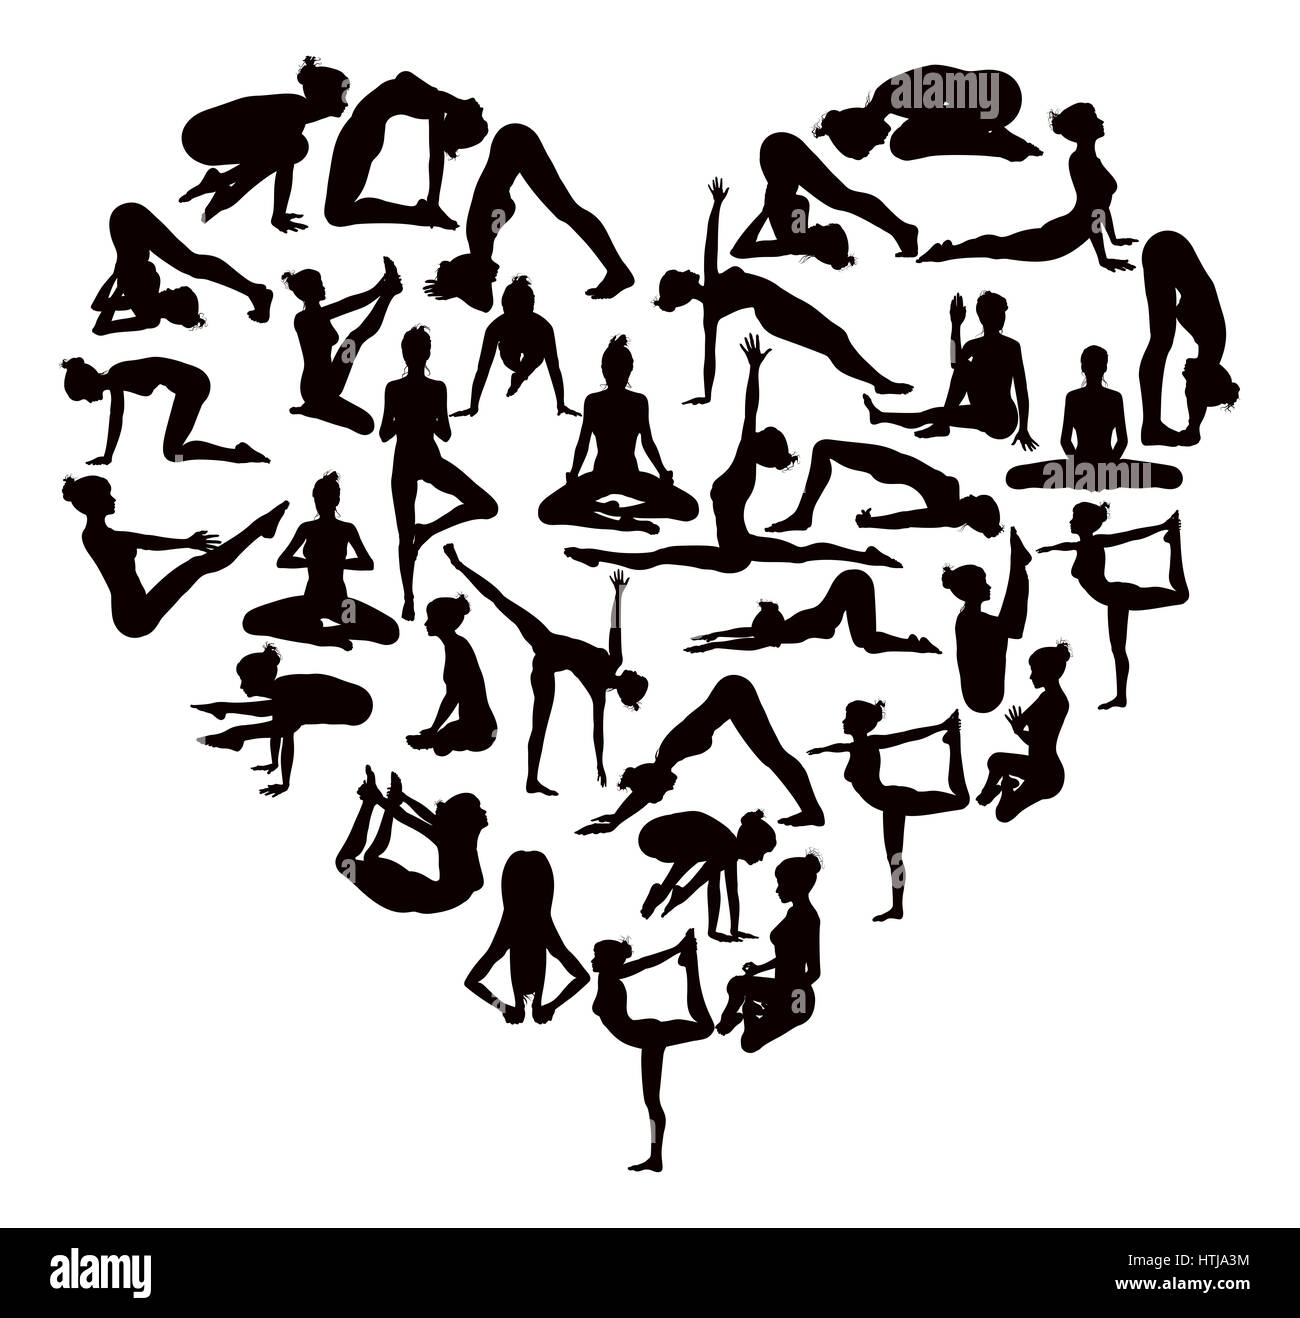 A heart shaped set of detailed yoga poses and postures silhouettes Stock Photo